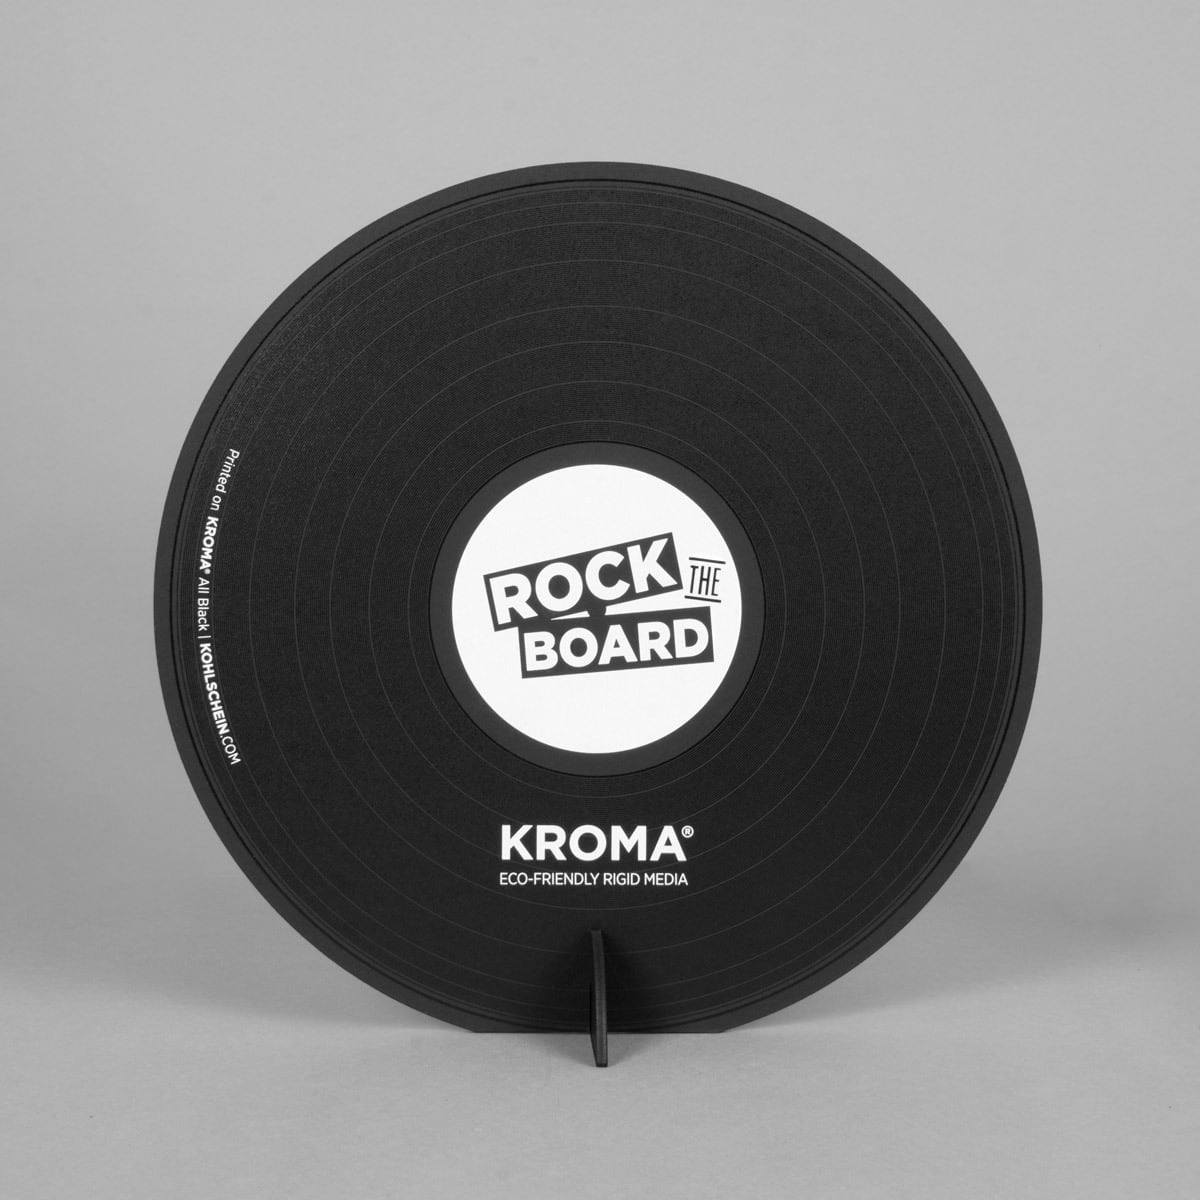 Screen printed record made of KROMA All Black